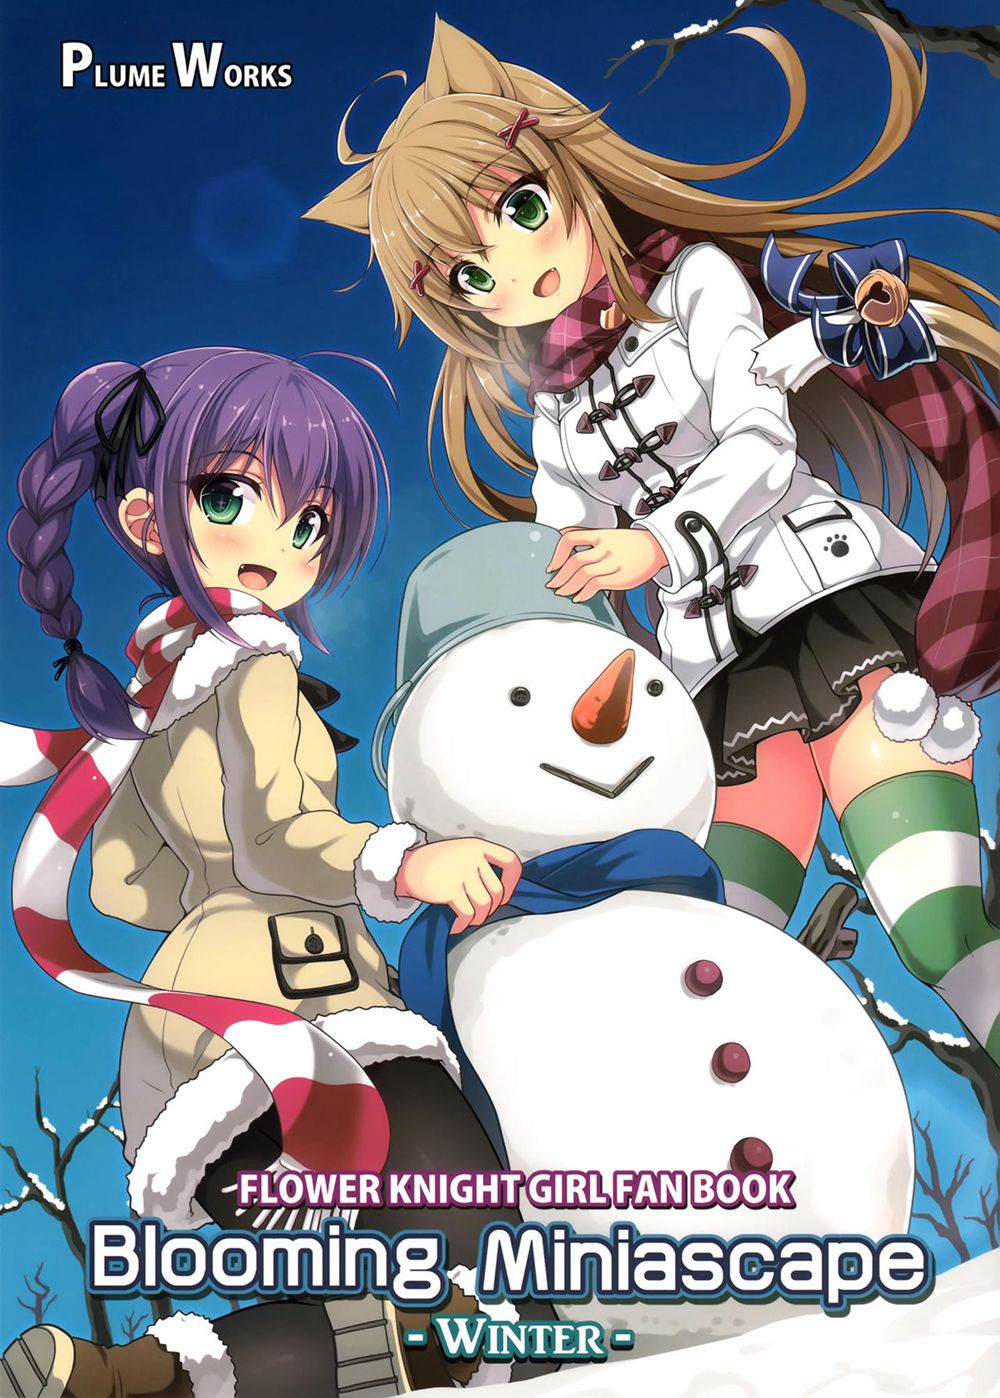 (C91)(同人誌)[PLUME WORKS (宇路月あきら)] Blooming Miniascape -WINTER- (フラワーナイトガール)[汉化]